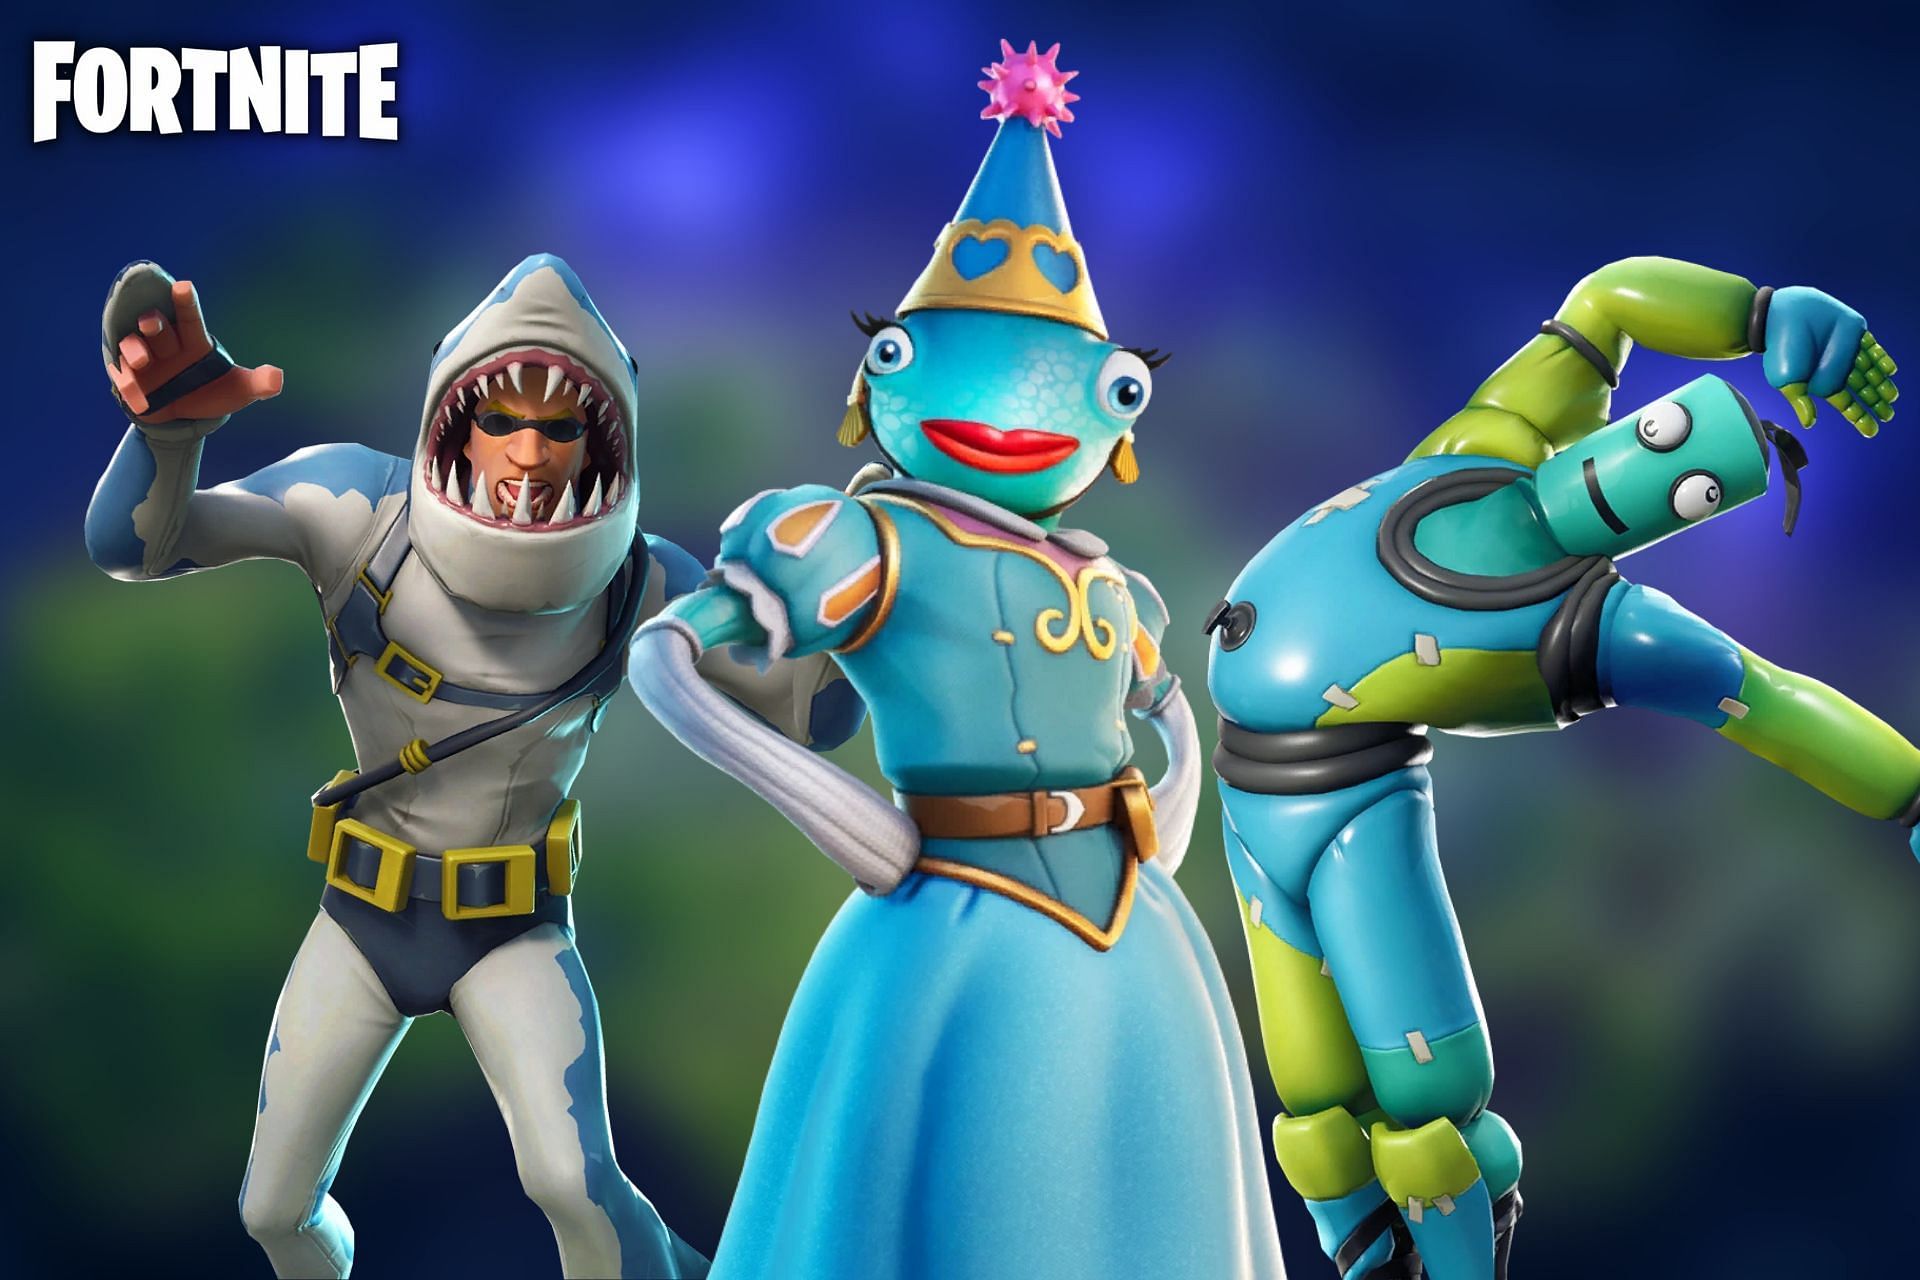 These Fortnite skins are absolutely hilarious to look at in-game (Image via Sportskeeda)